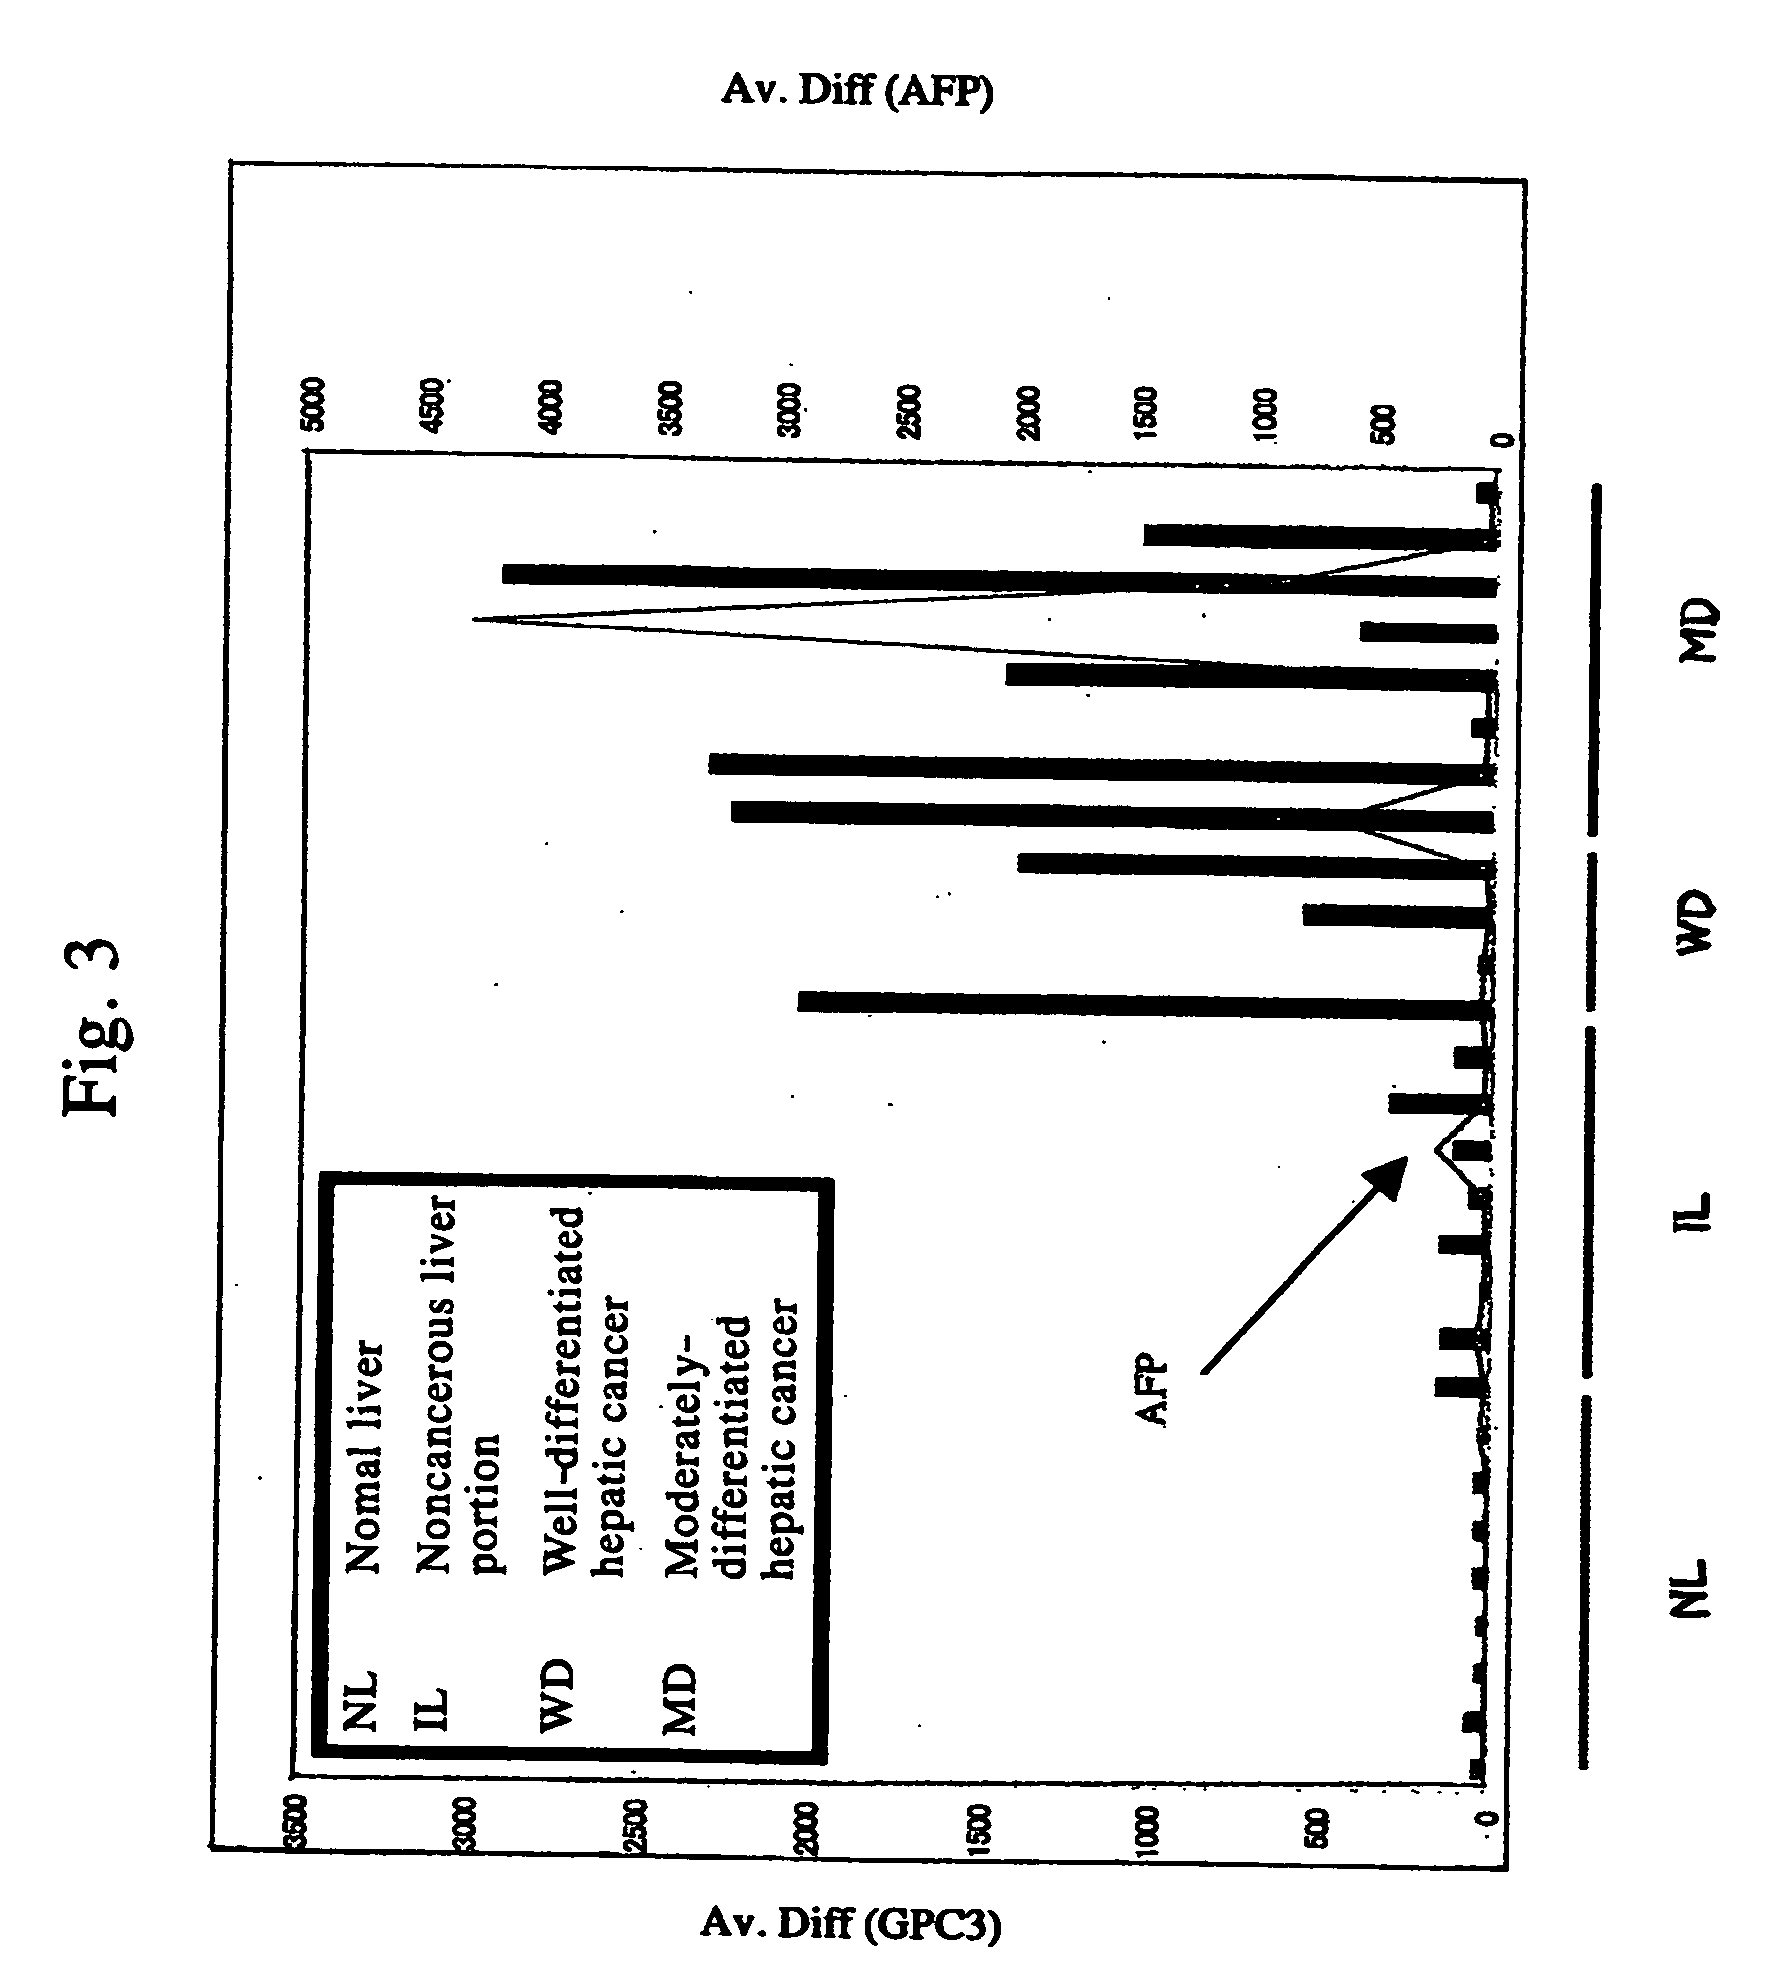 Method for diagnosing cancer by detecting gpc3